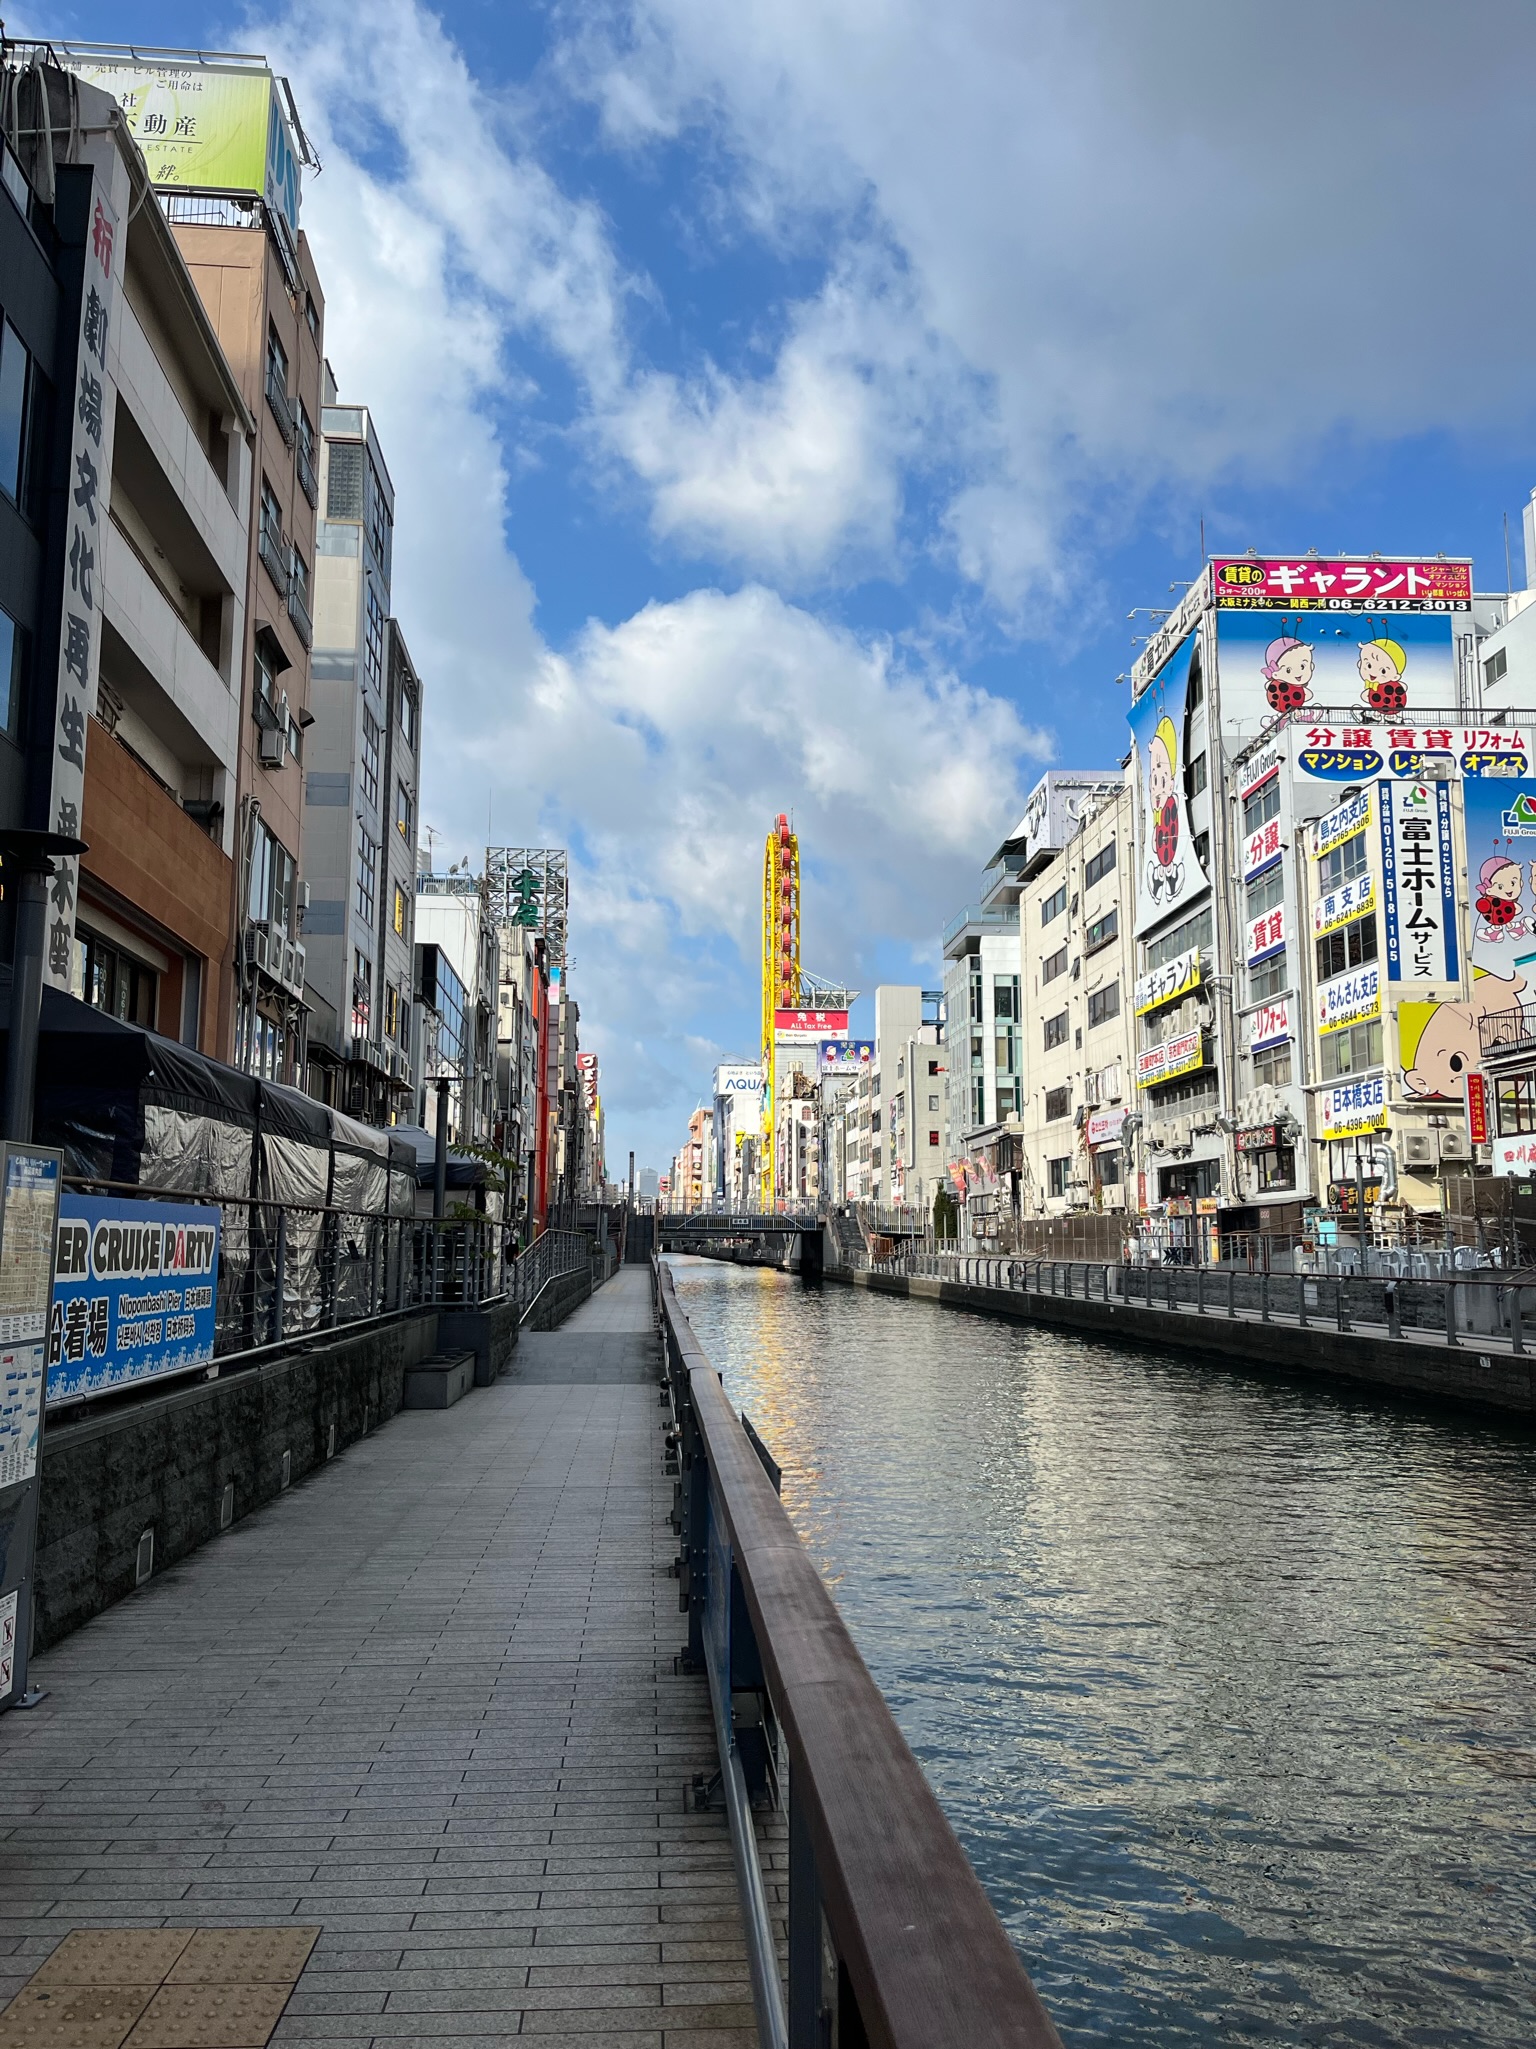 A road and the Dotonbori River are seen adjacent to one another and flanked by buildings on a slightly cloudy day.